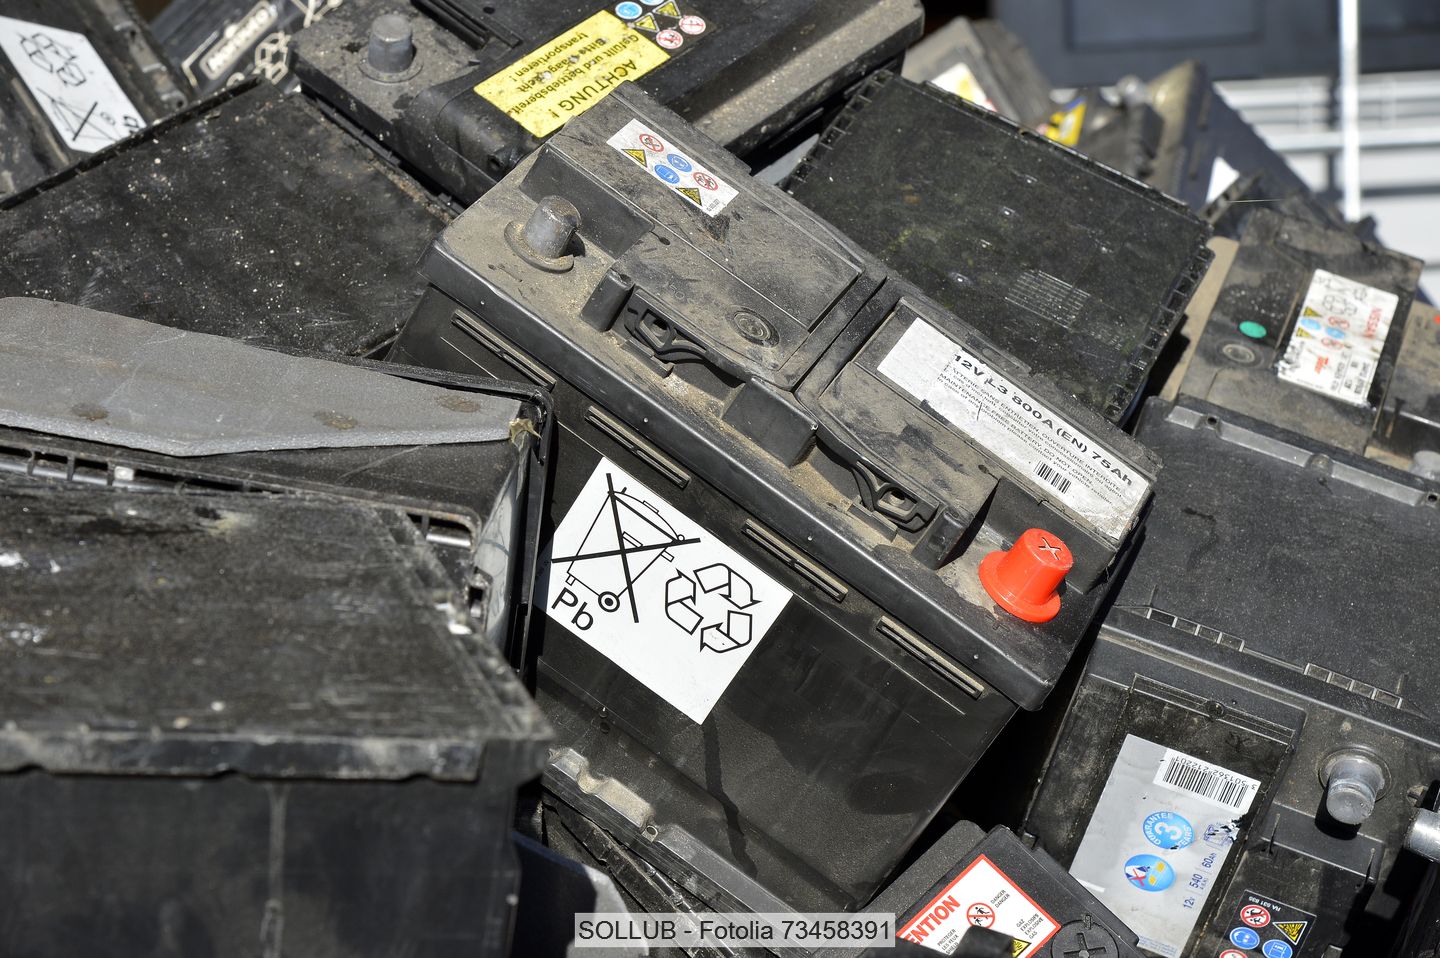 Used lead acid batteries piled in a collection bin